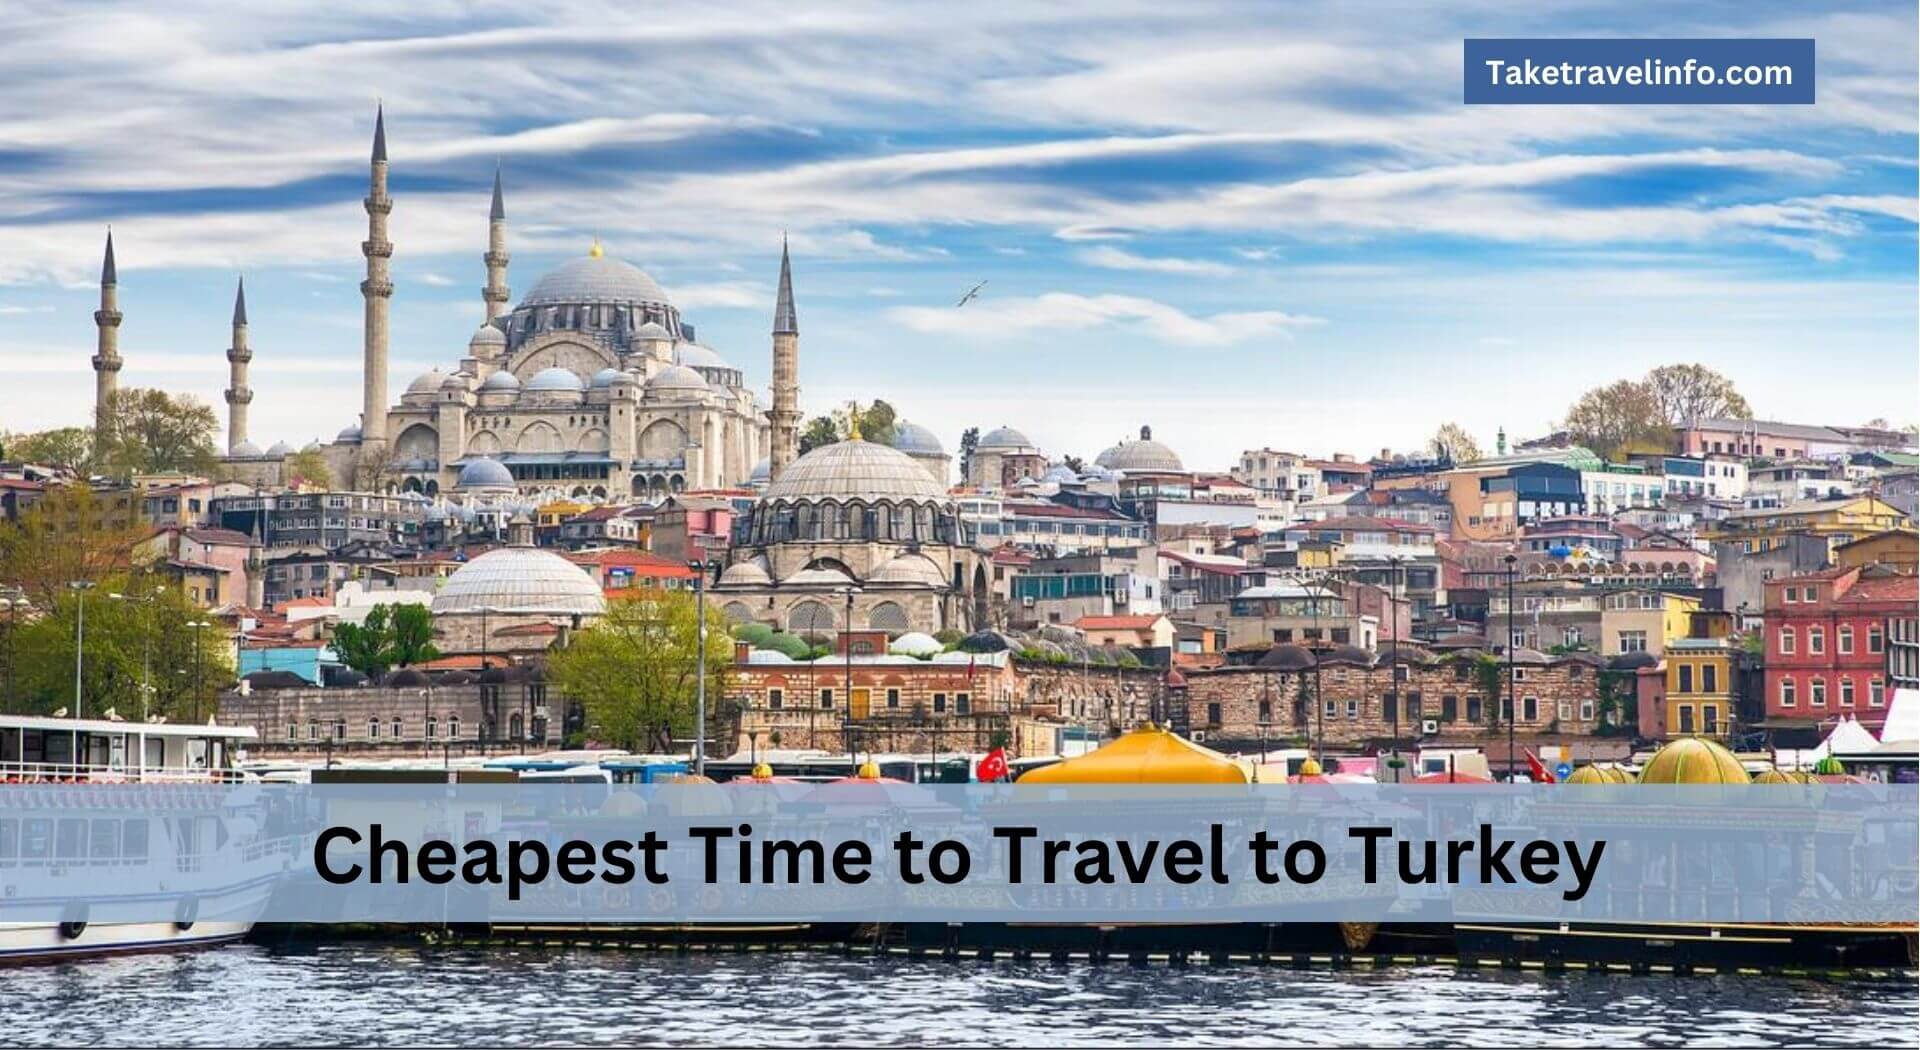 When is the Best Time to Travel to Turkey